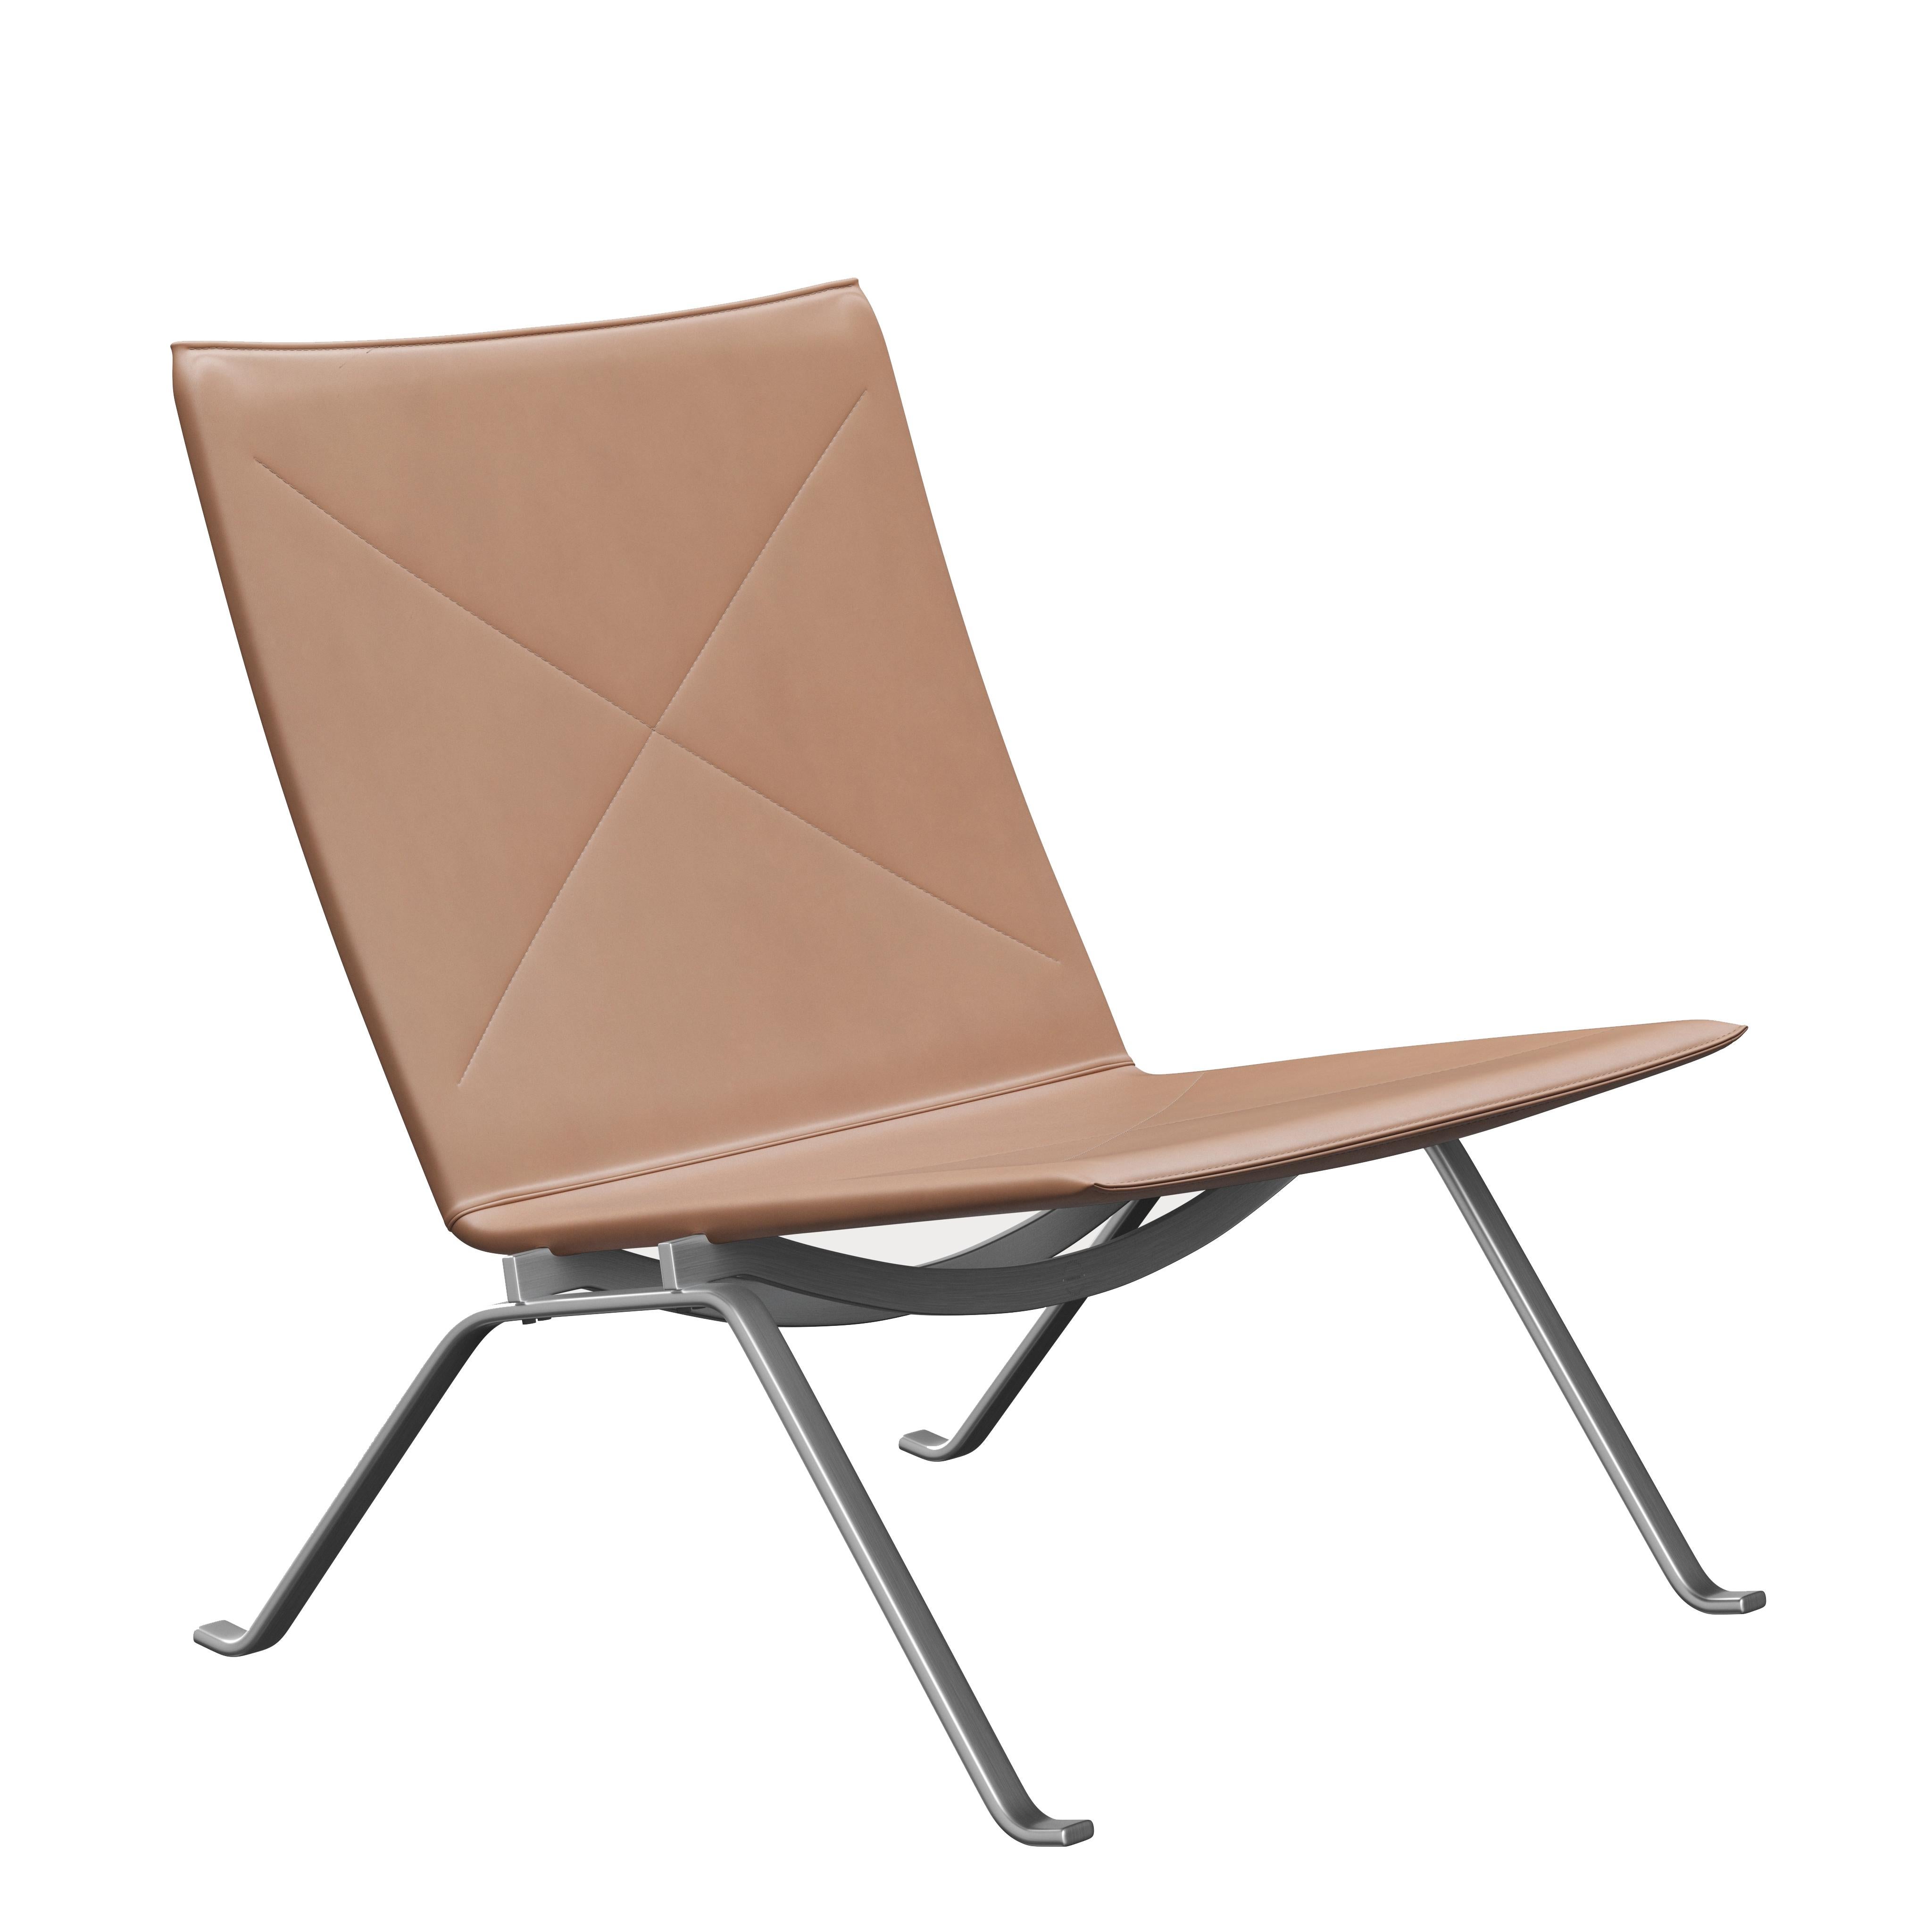 Poul Kjærholm 'PK22' Lounge Chair for Fritz Hansen in Leather (Cat. 5) For Sale 9